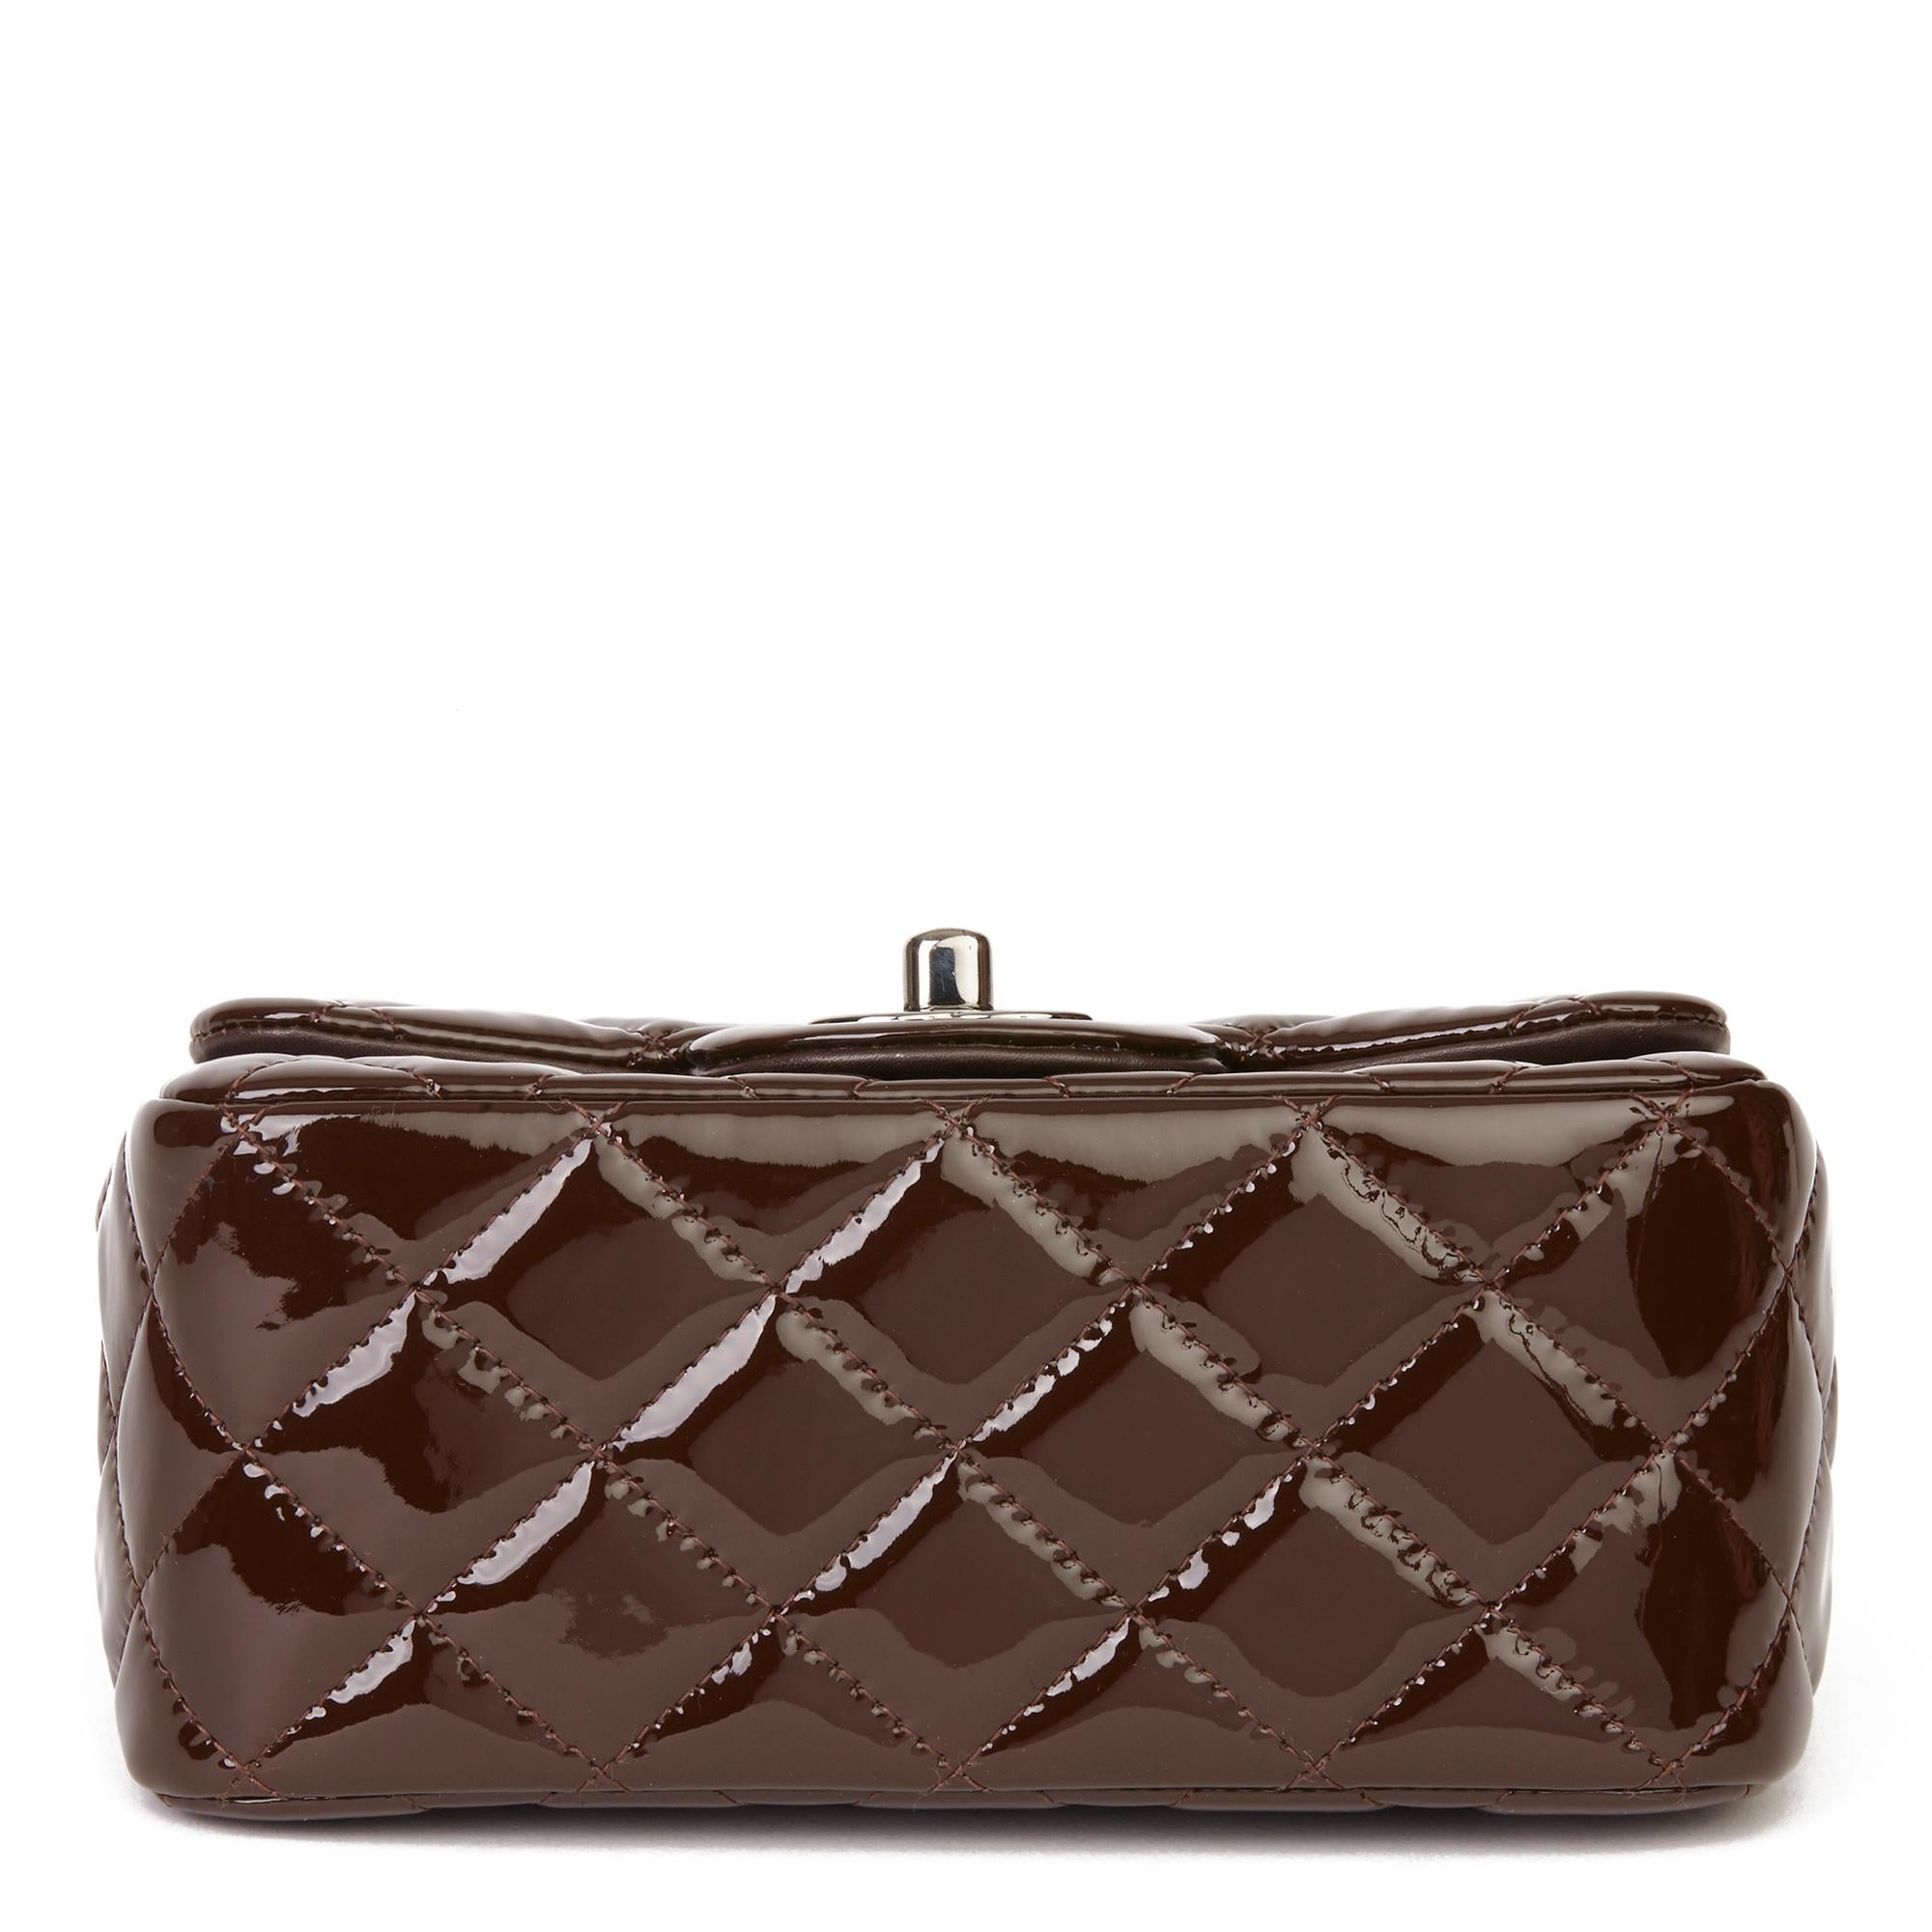 2014 Chanel Chocolate Brown Quilted Patent Leather Mini Flap Bag 1